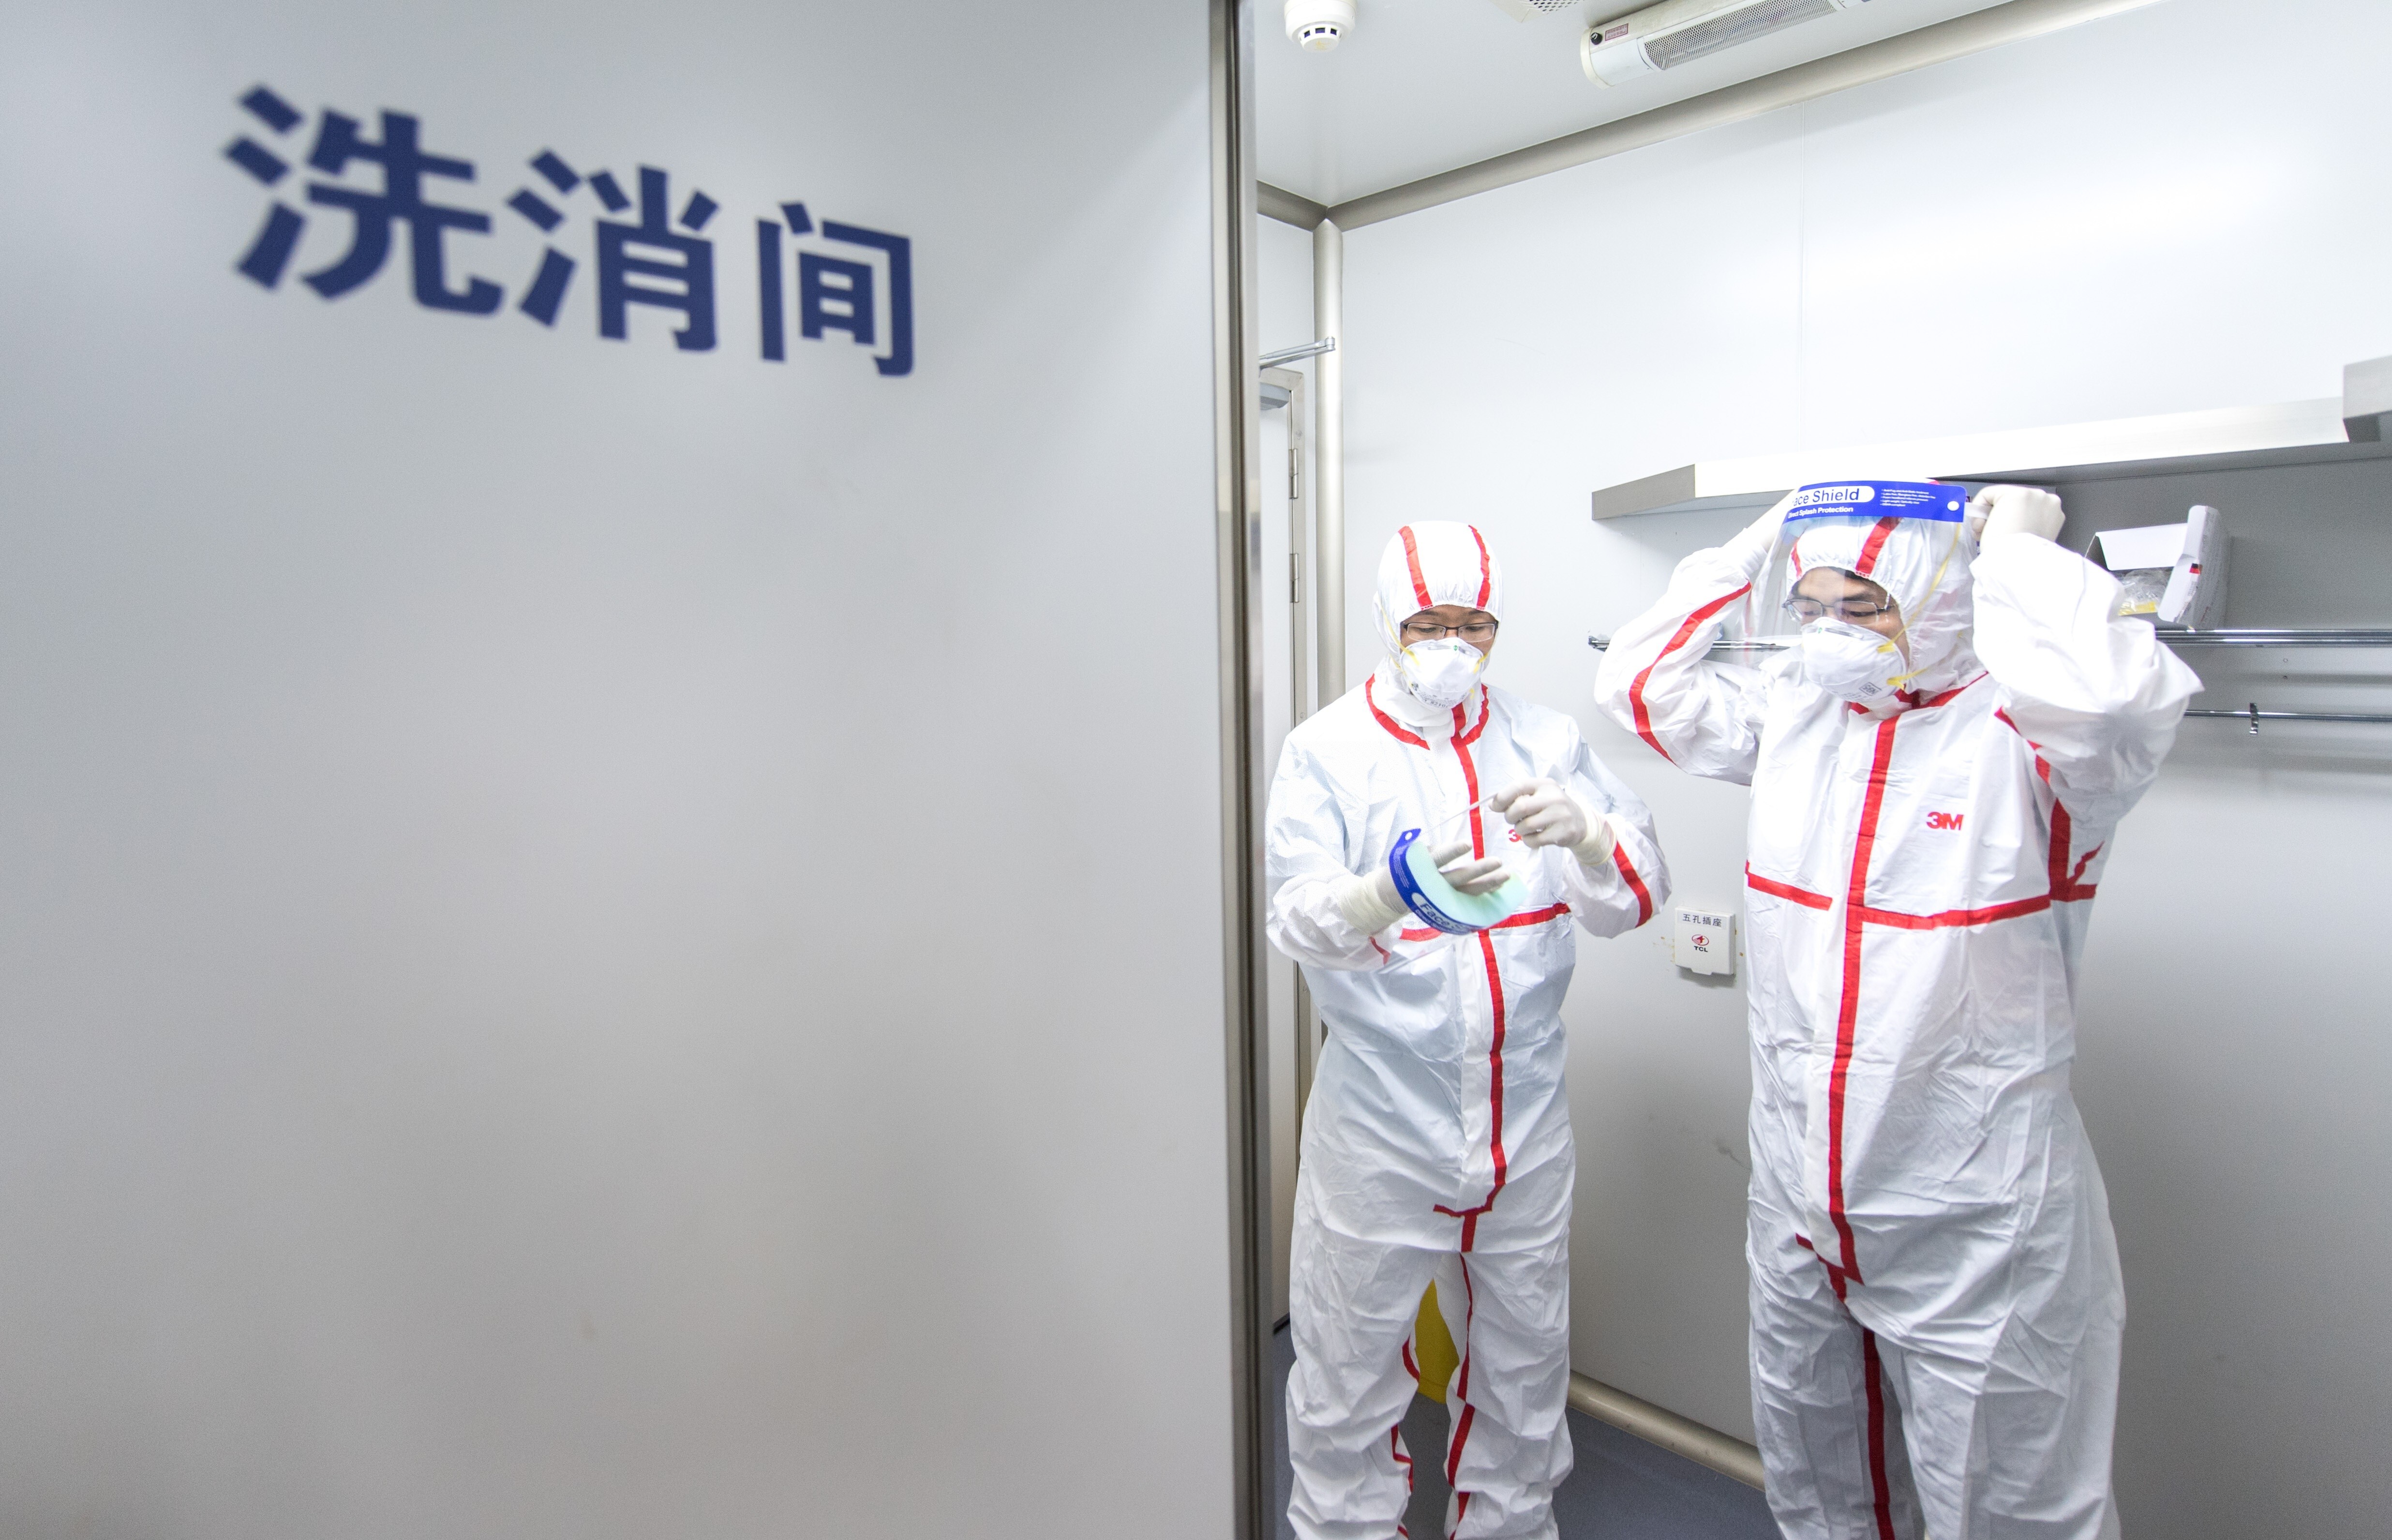 Staff at the Wuhan Institute of Virology have to undertake strict safety procedures. Photo: Xinhua